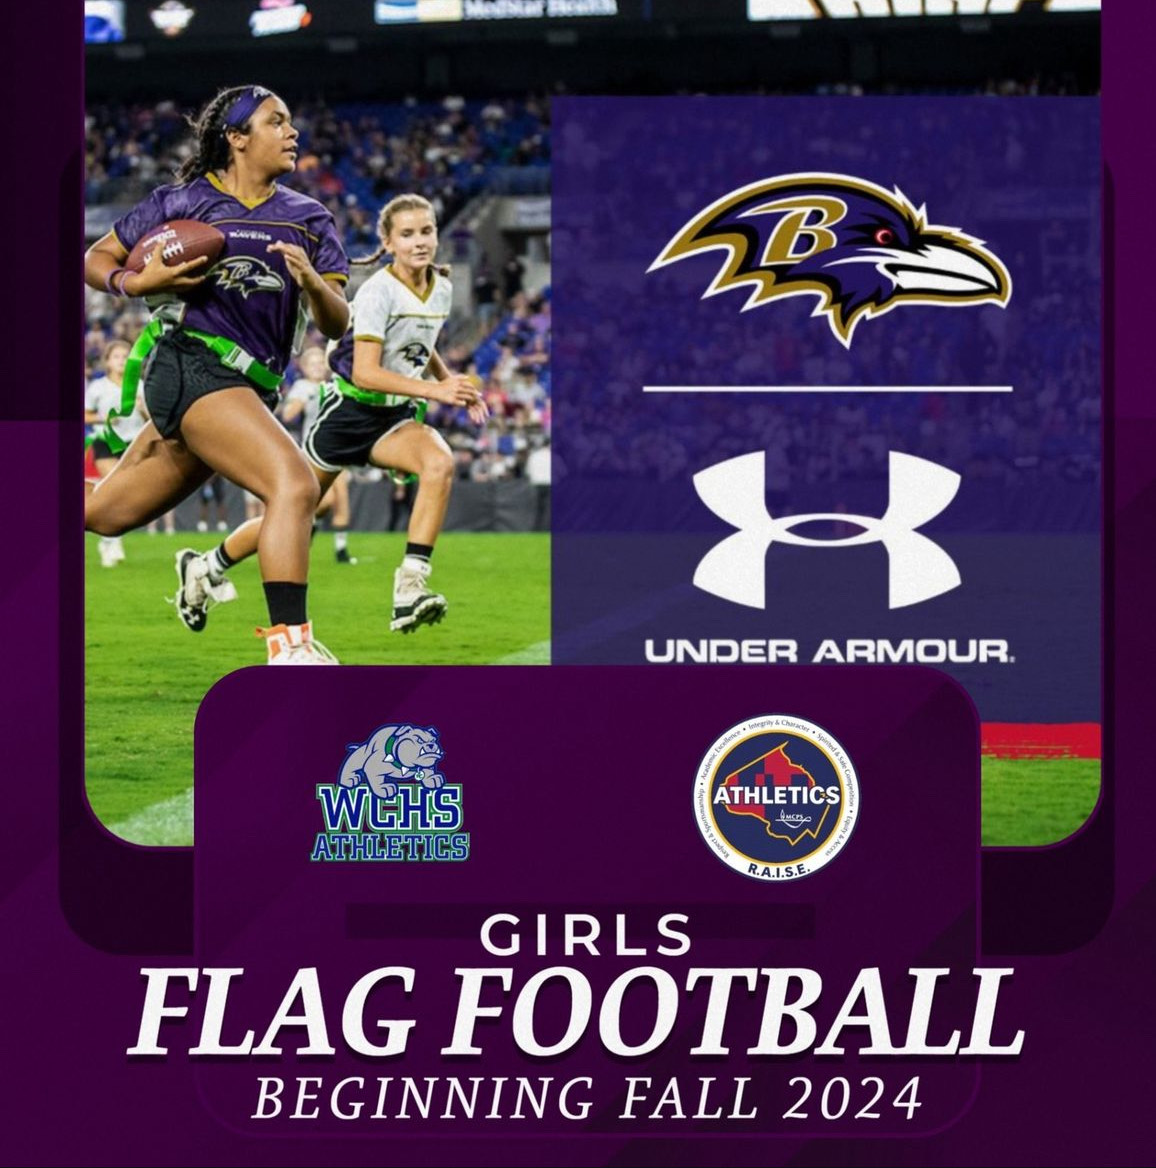 Many girls at WCHS have seen either seen flag football on TV or heard of others who play it and are excited to join the growing movement of expanding girls flag football while showing off their athleticism. 